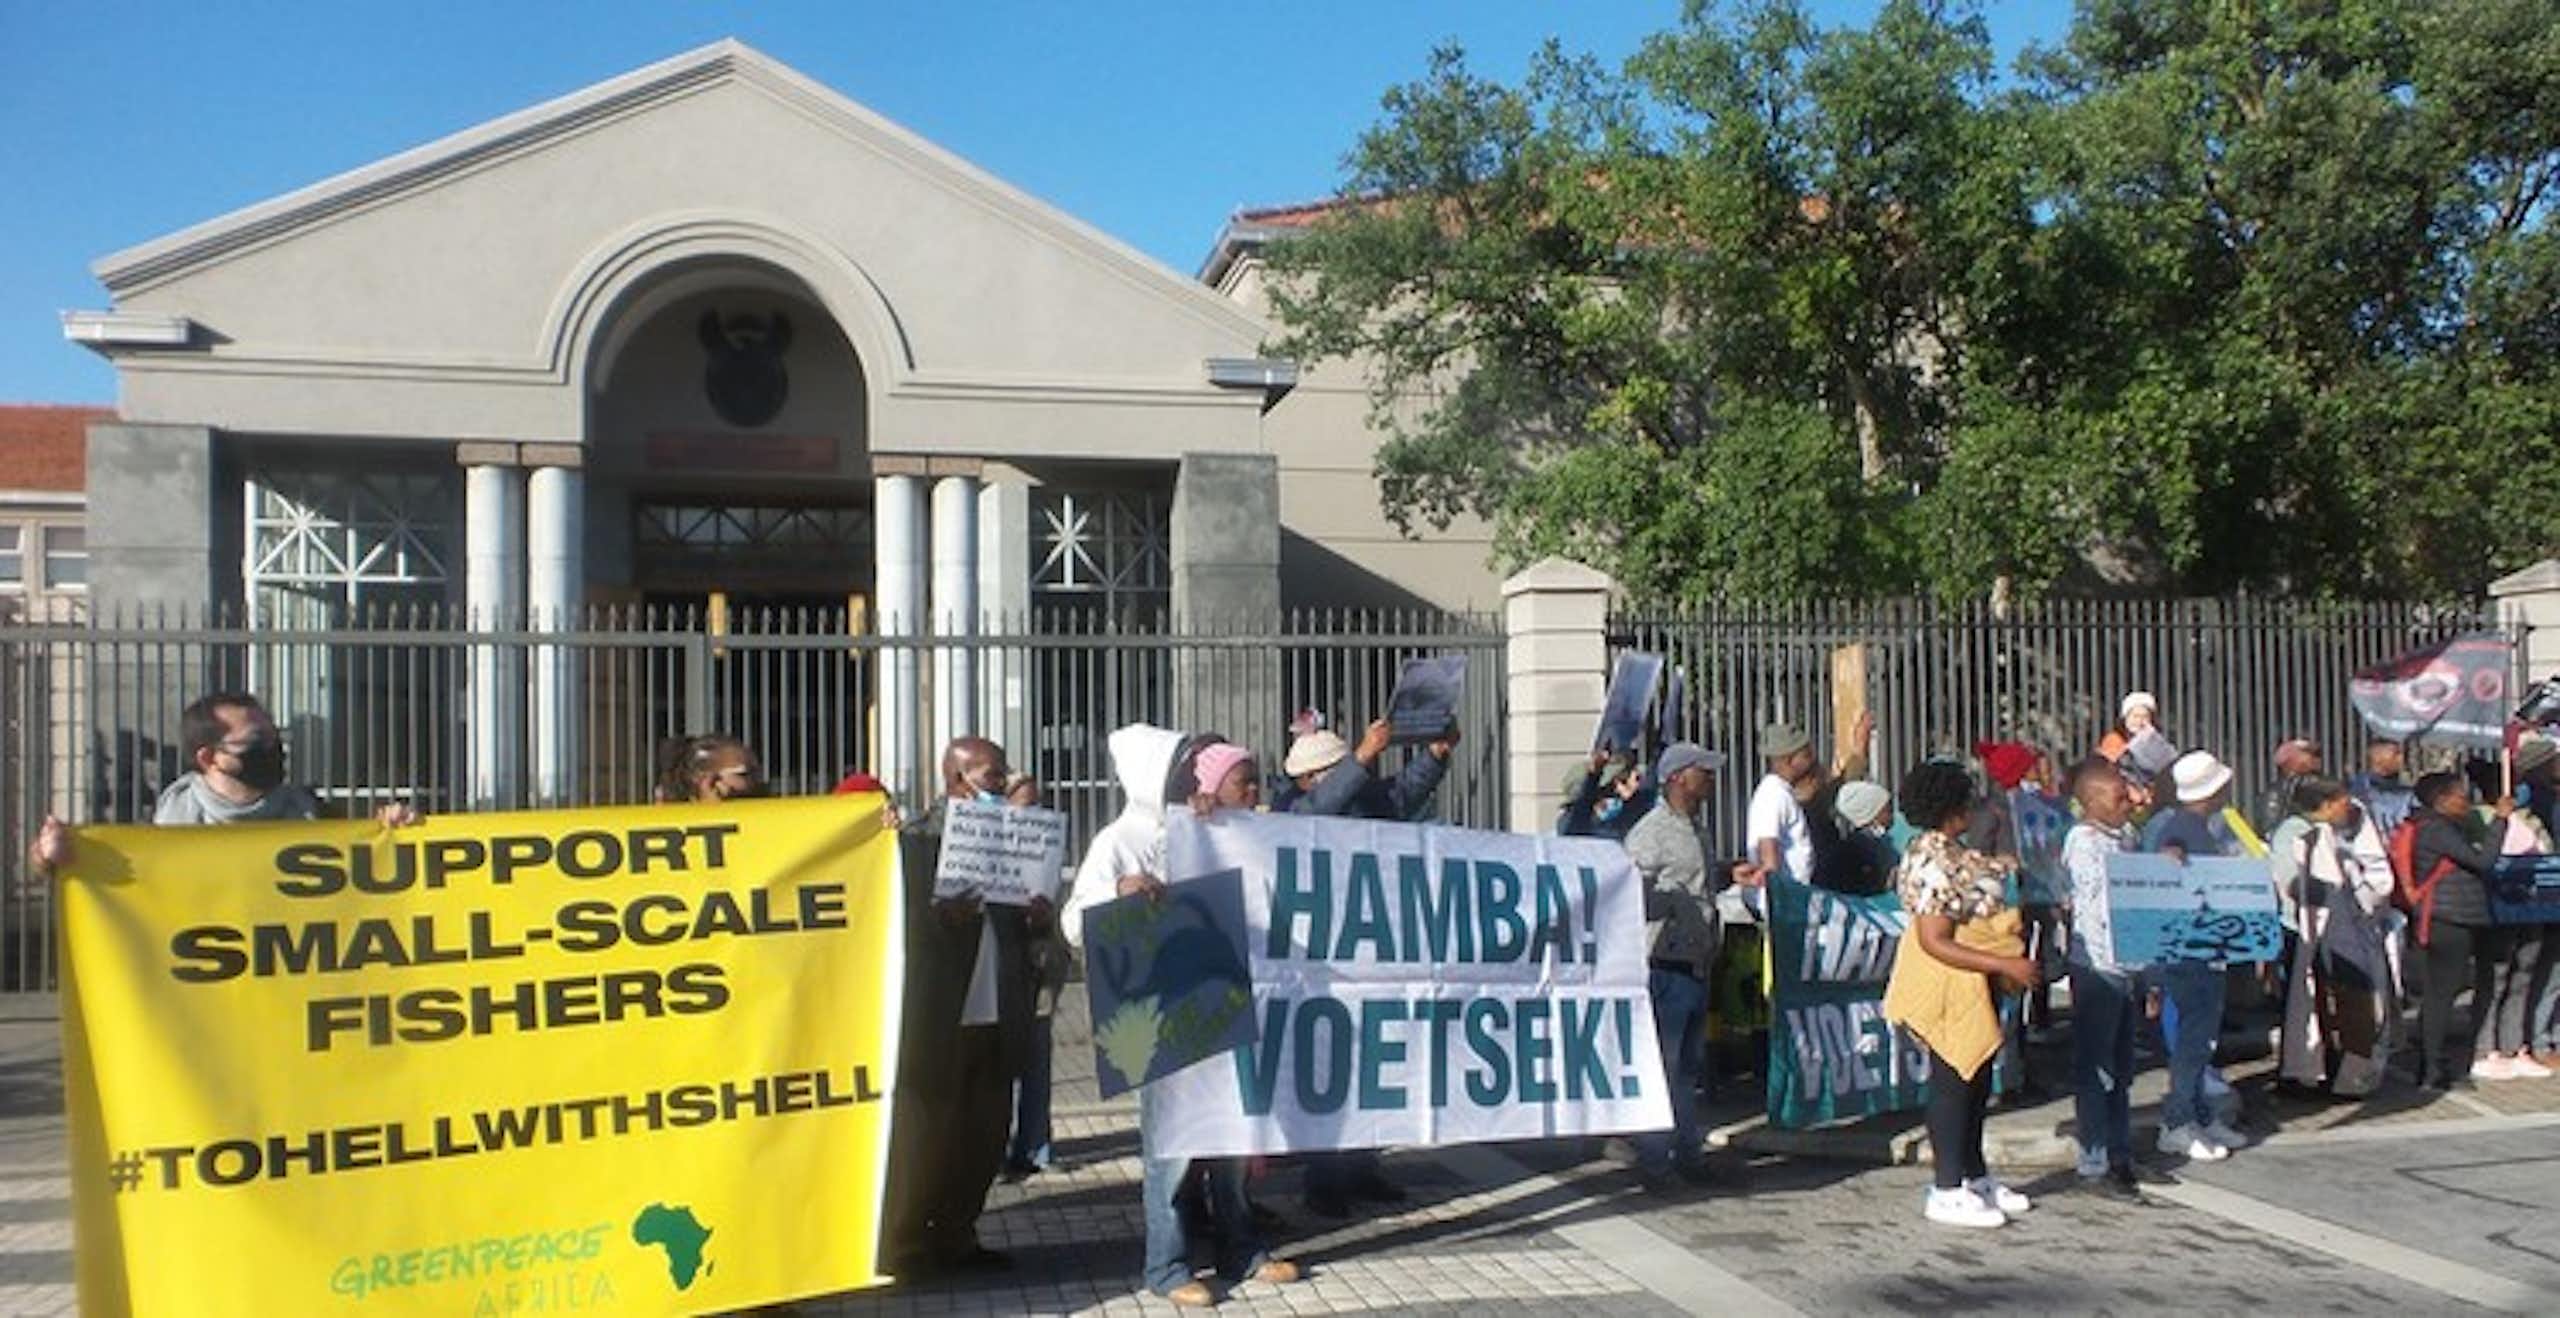 Protestors stand outside a courthouse carrying a yellow banner proclaiming 'support small scale fishers, To Hell with Shell' and another white banner proclaiming "Hamba! Voetsek!" which means get lost